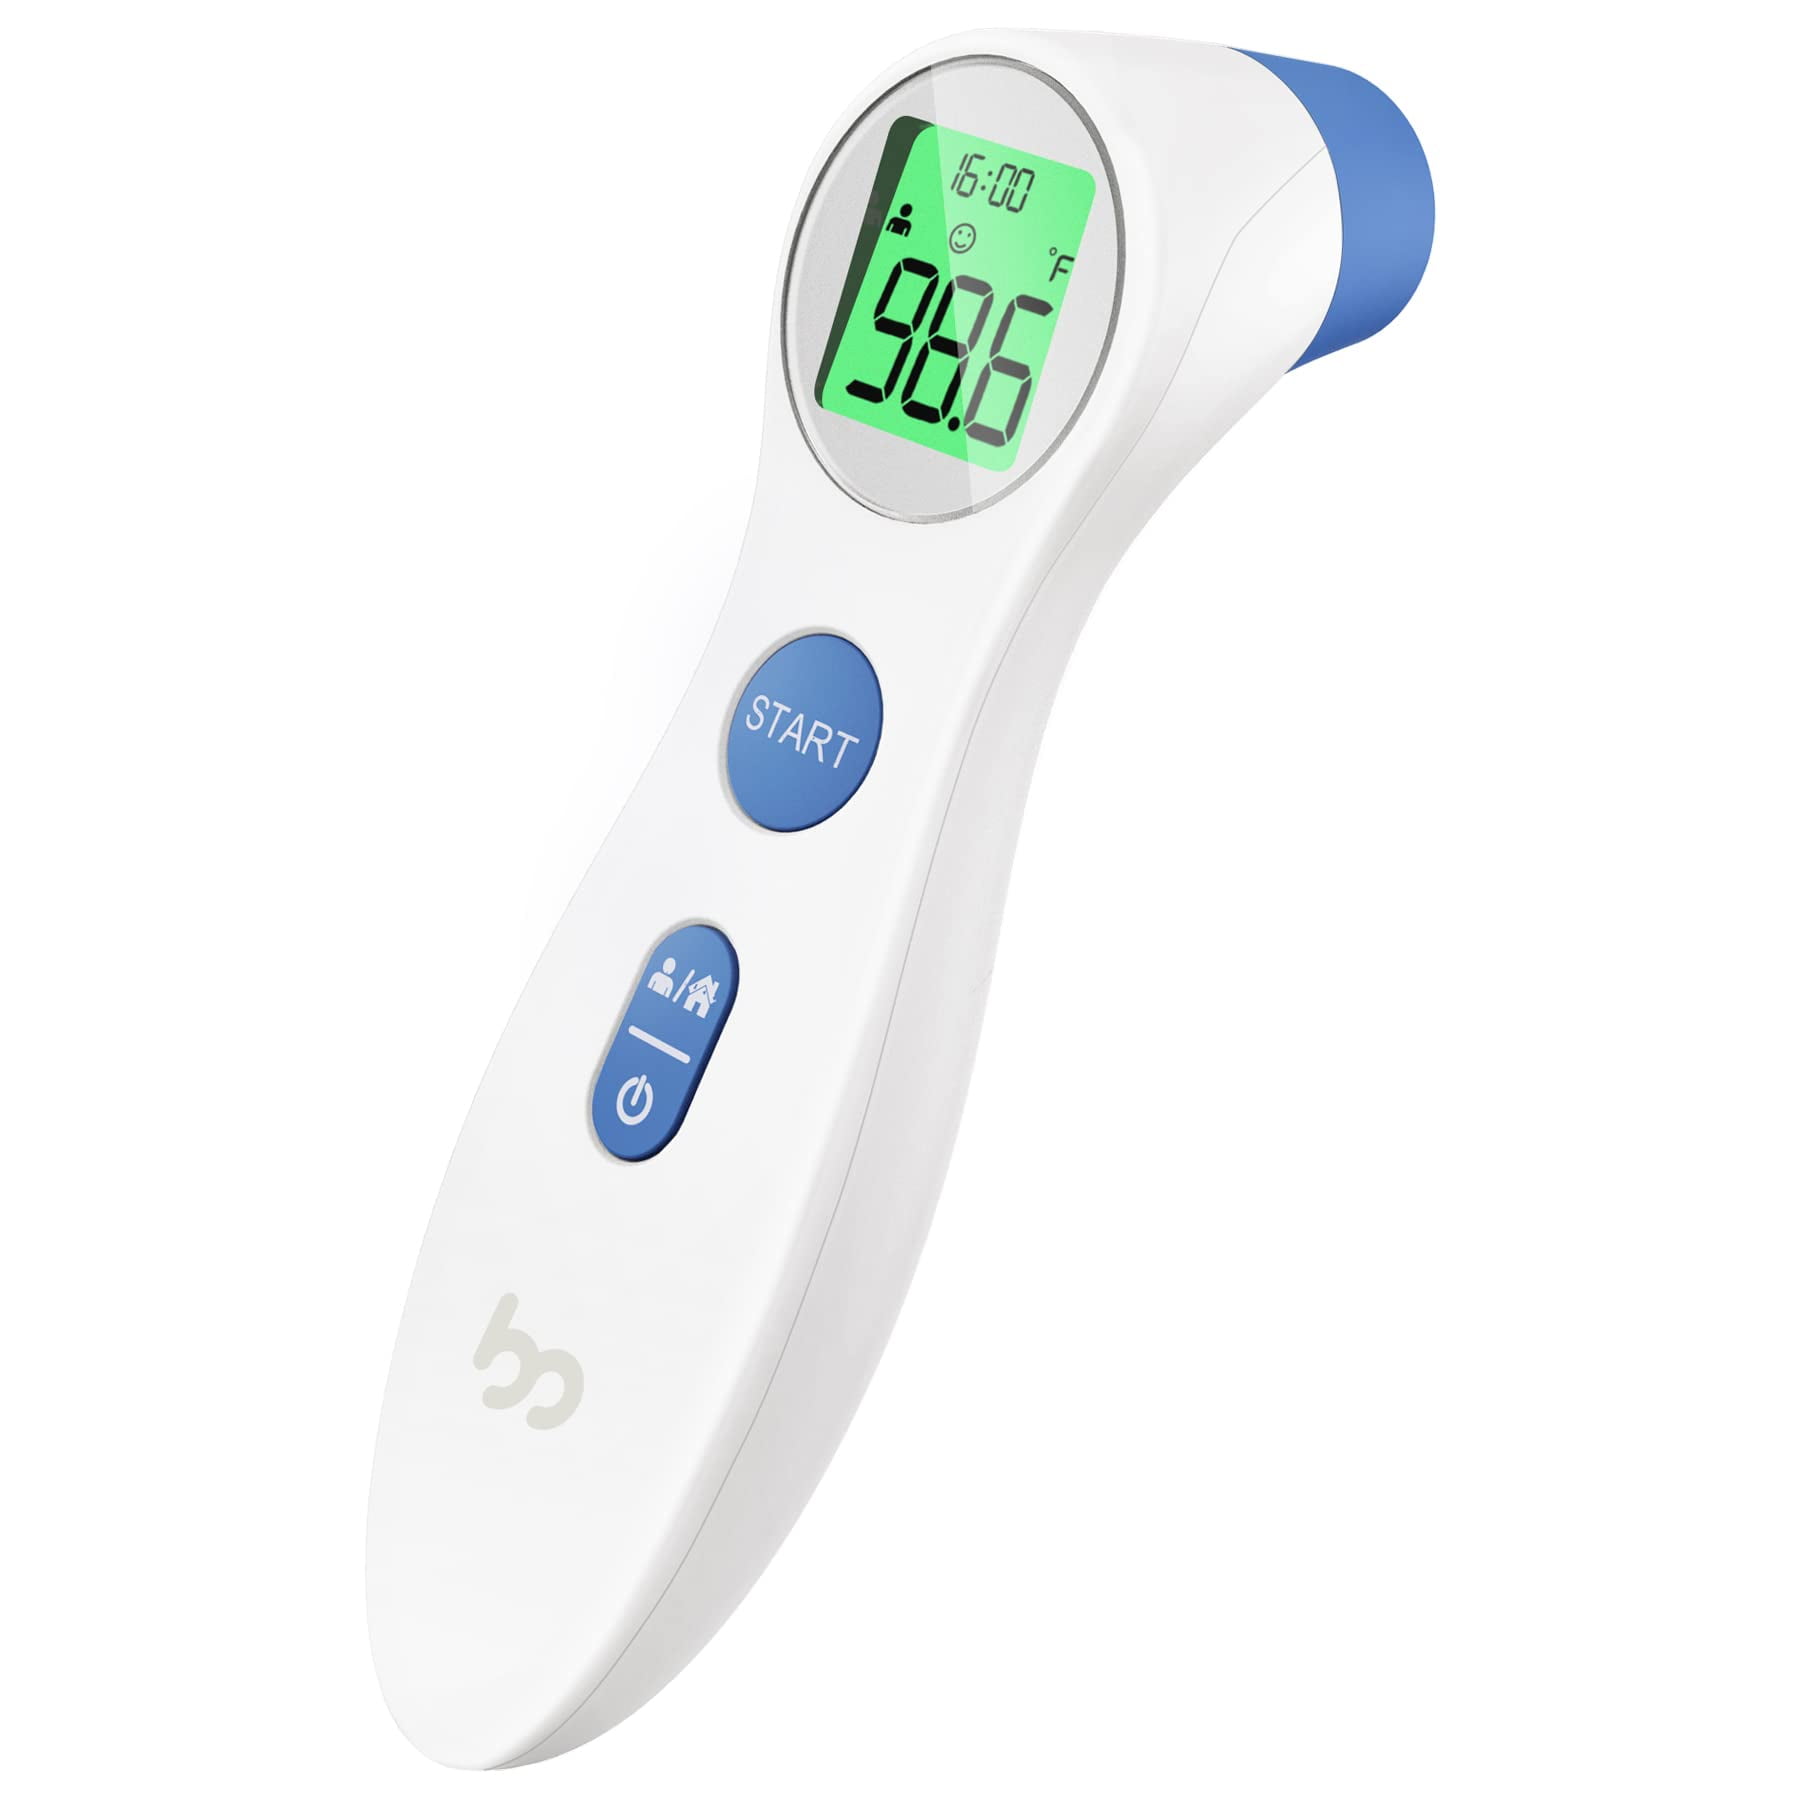 Thermometer for Adults FSA Eligible High Accuracy No-Touch Digital  Thermometer with Fever Alarm and Memory Function Ideal for Babies Kids Home  and Office Use Black